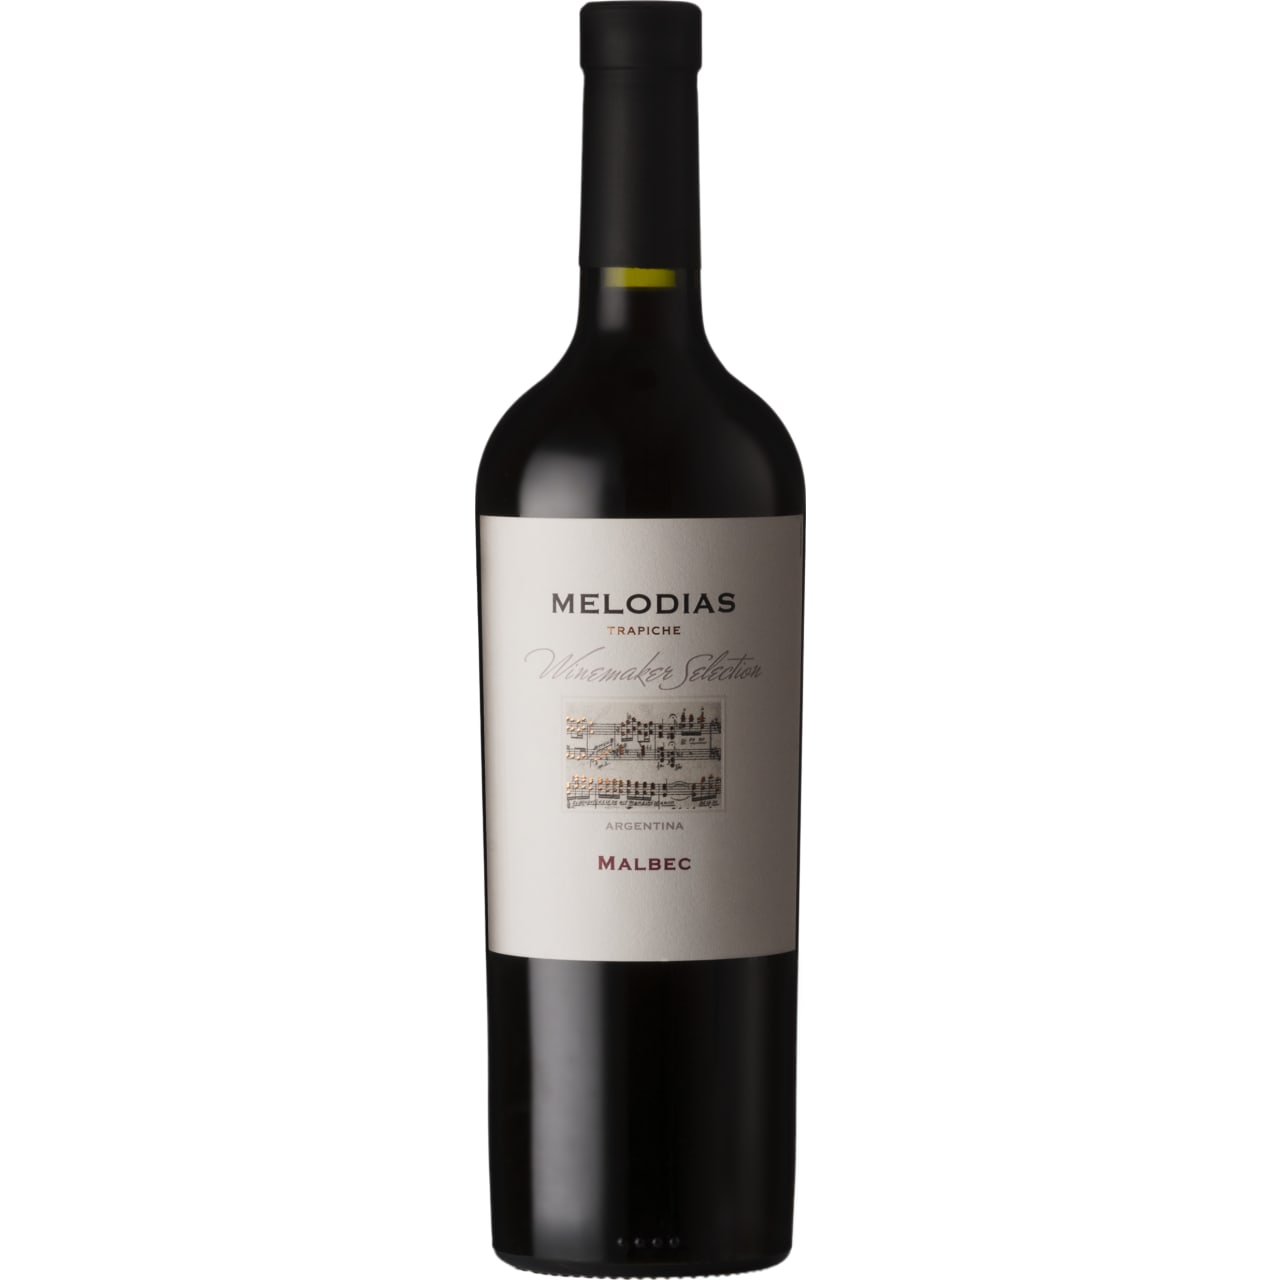 Juicy and medium bodied with notes of ripe plums, black cherries and a touch of sweet spice.